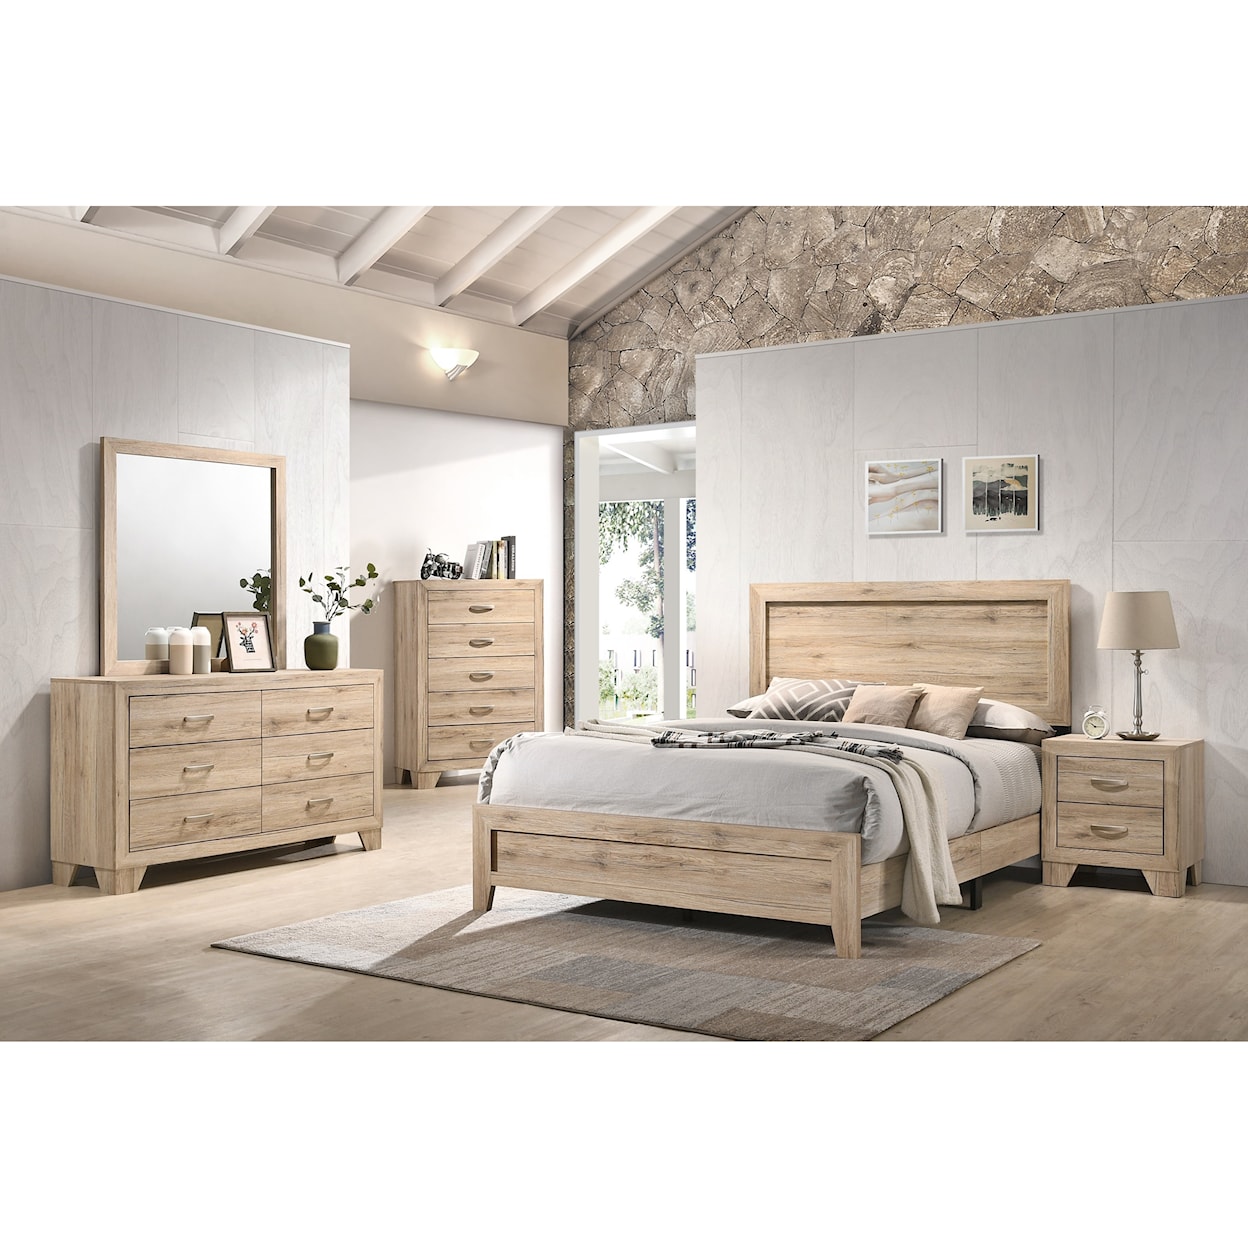 Acme Furniture Miquell 7pc Queen Bedroom Group